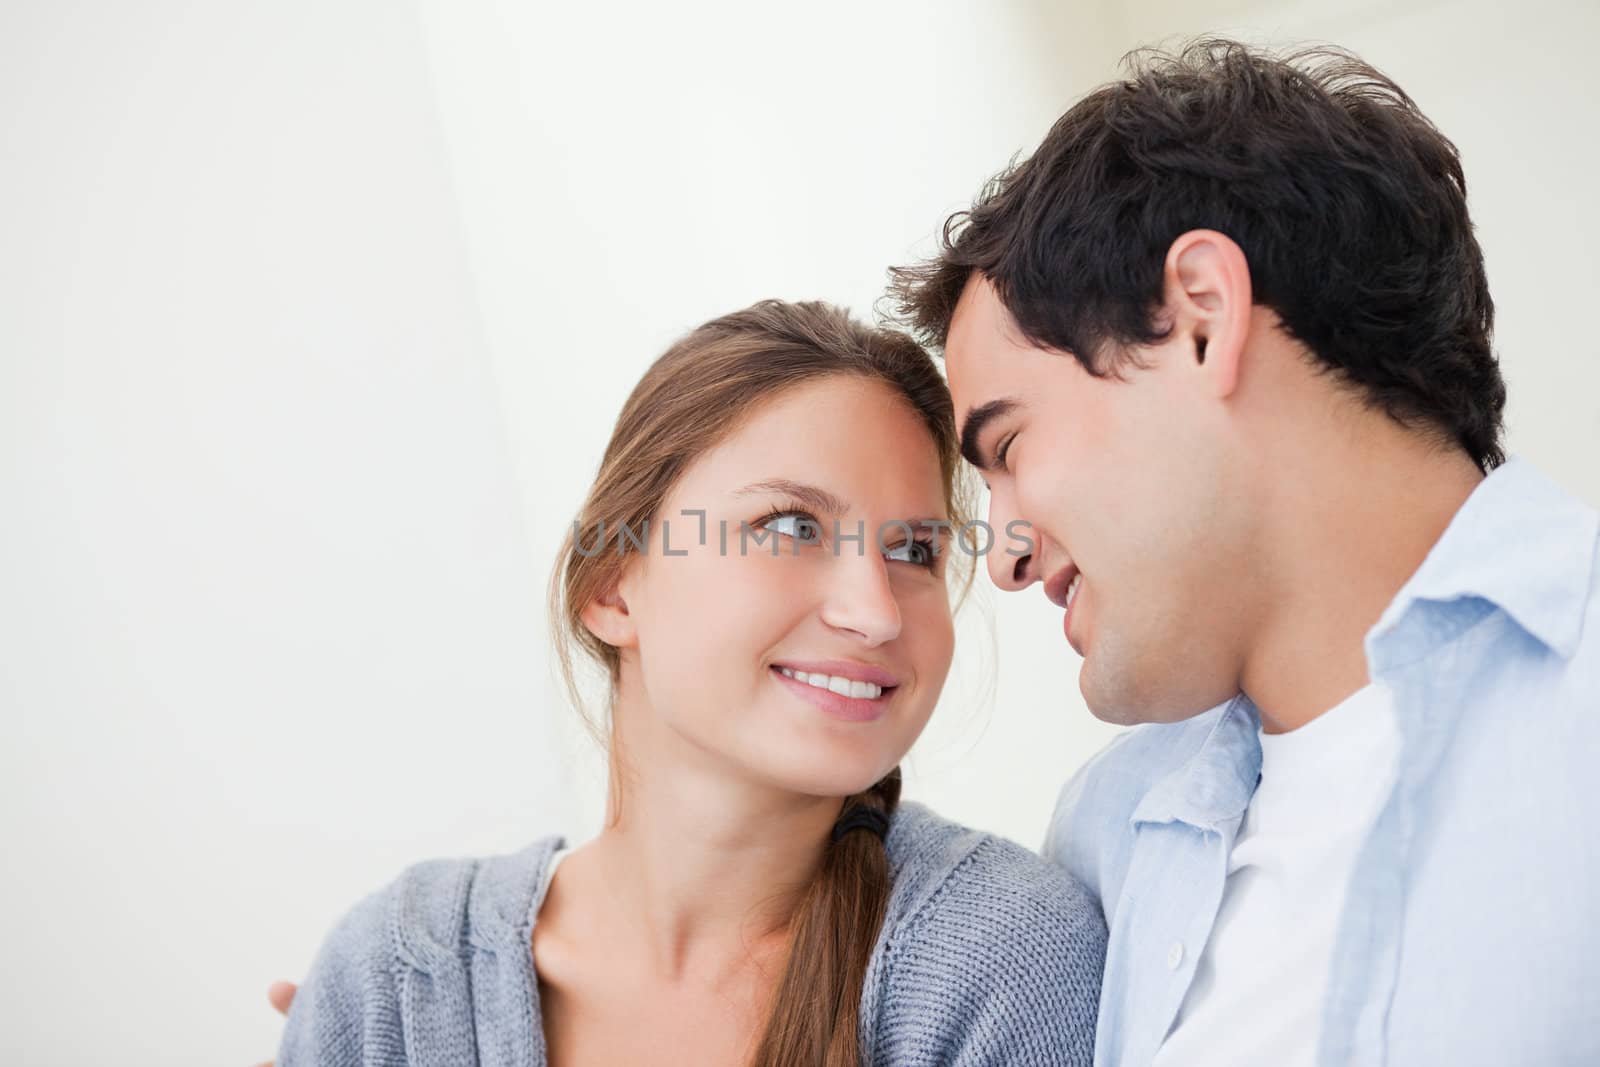 Couple smiling while embracing each other against grey background